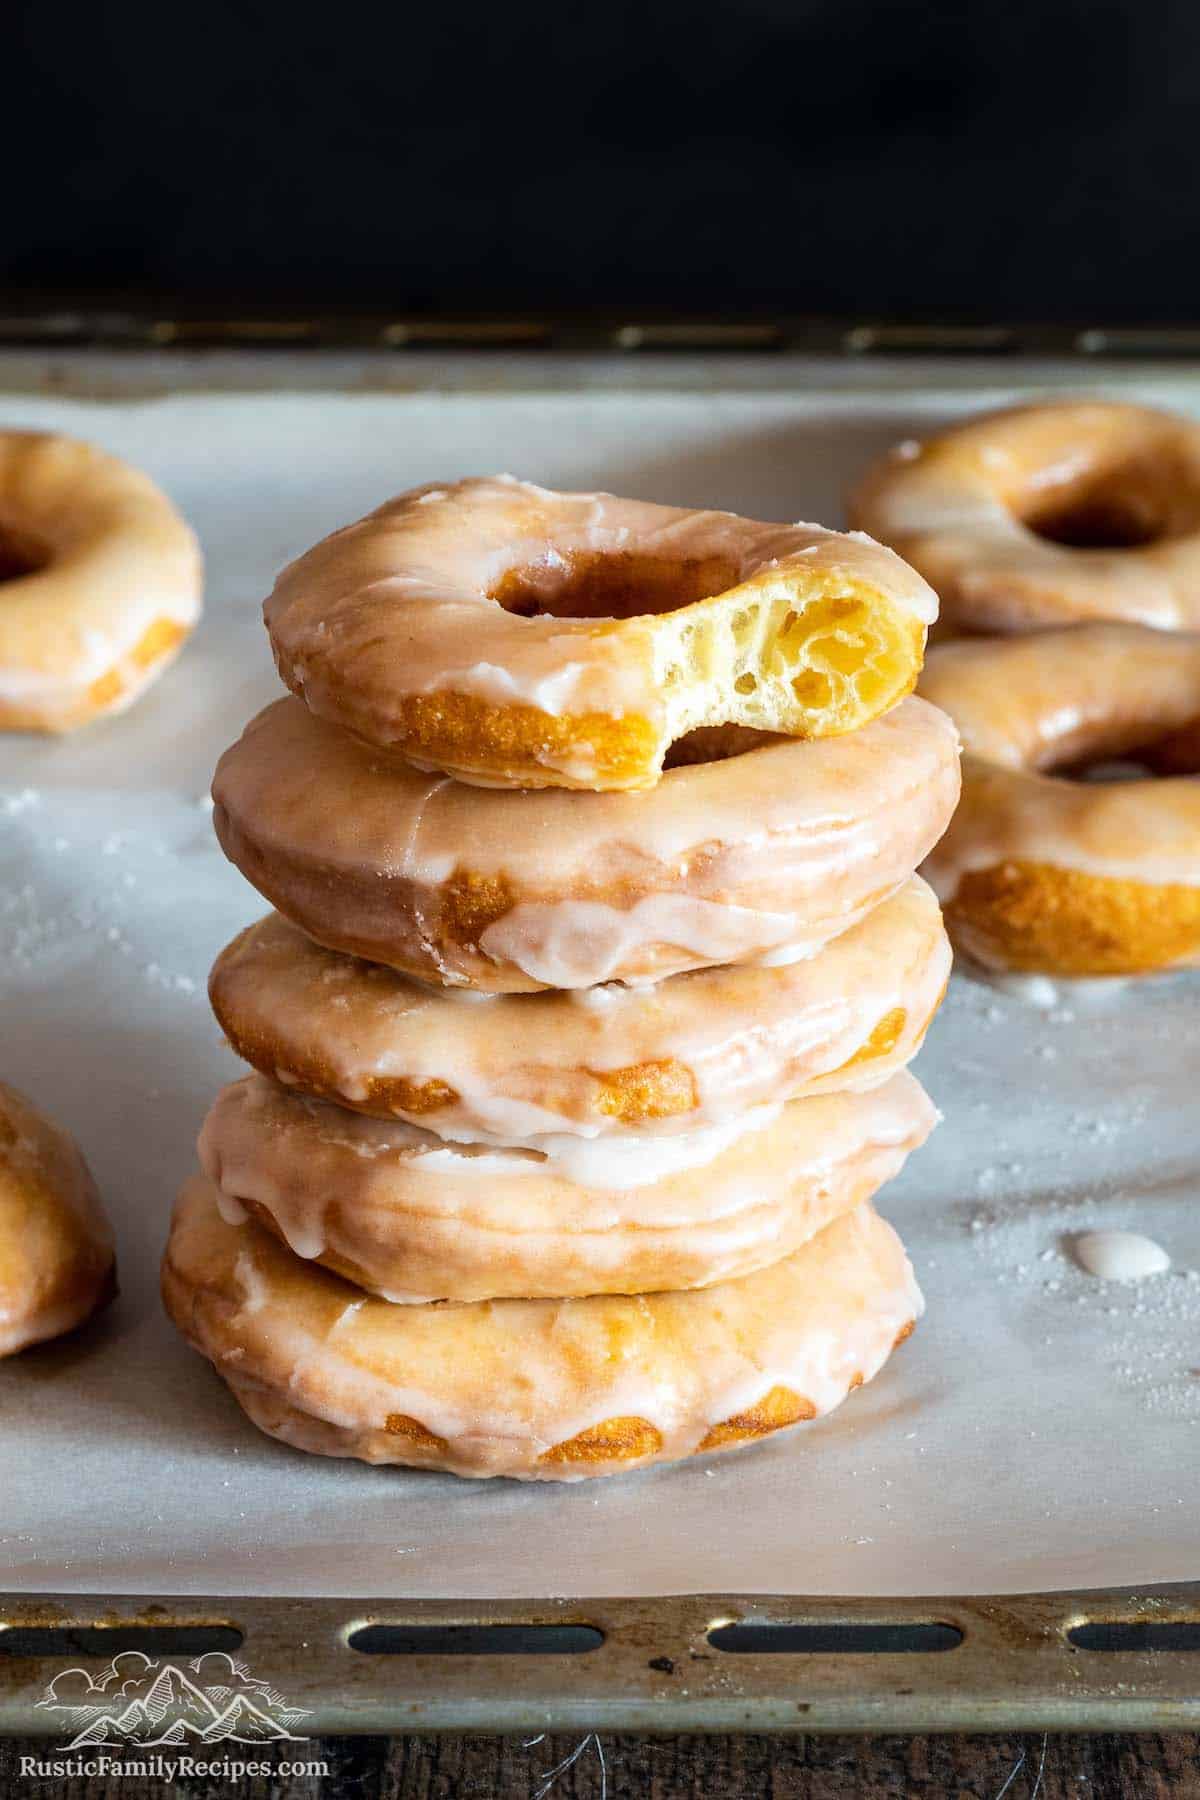 Stack of glazed sour cream donuts with bite taken out of top one